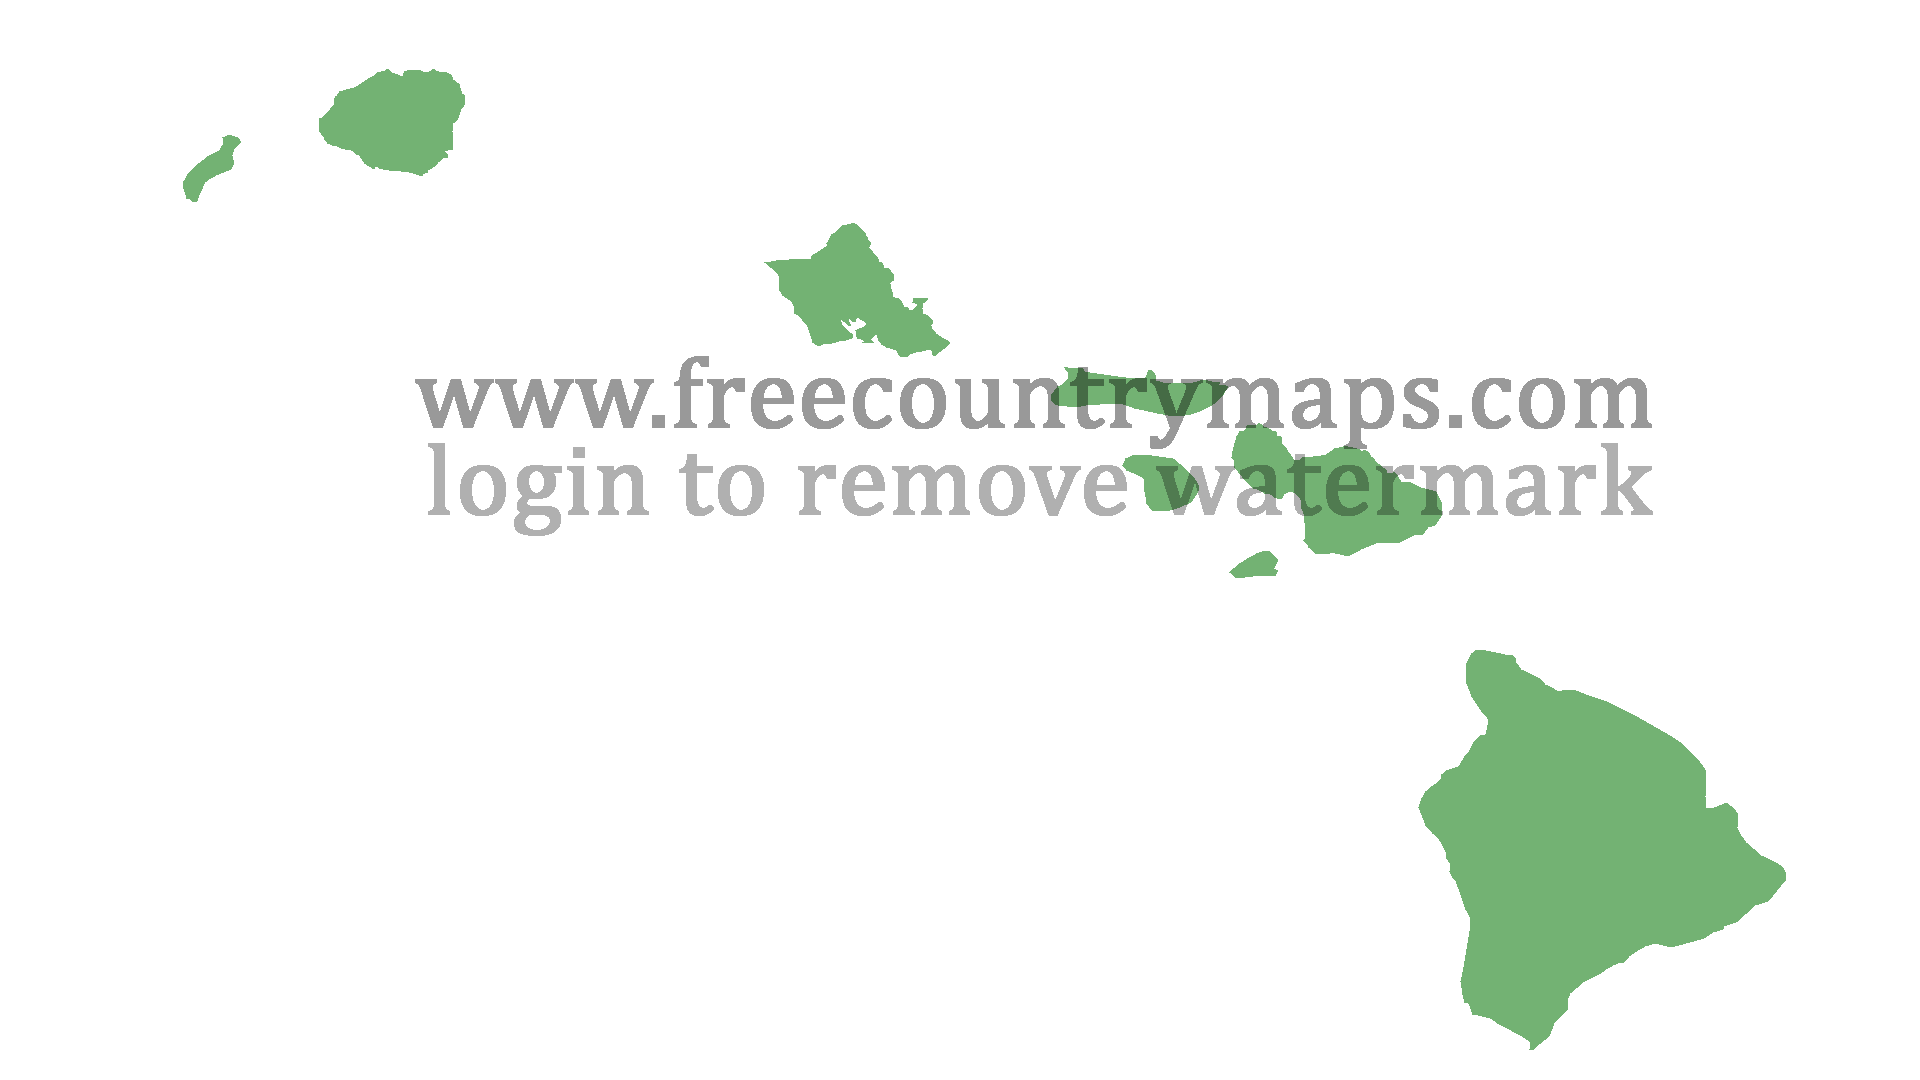 Blank Map of the State of Hawaii in 1080p